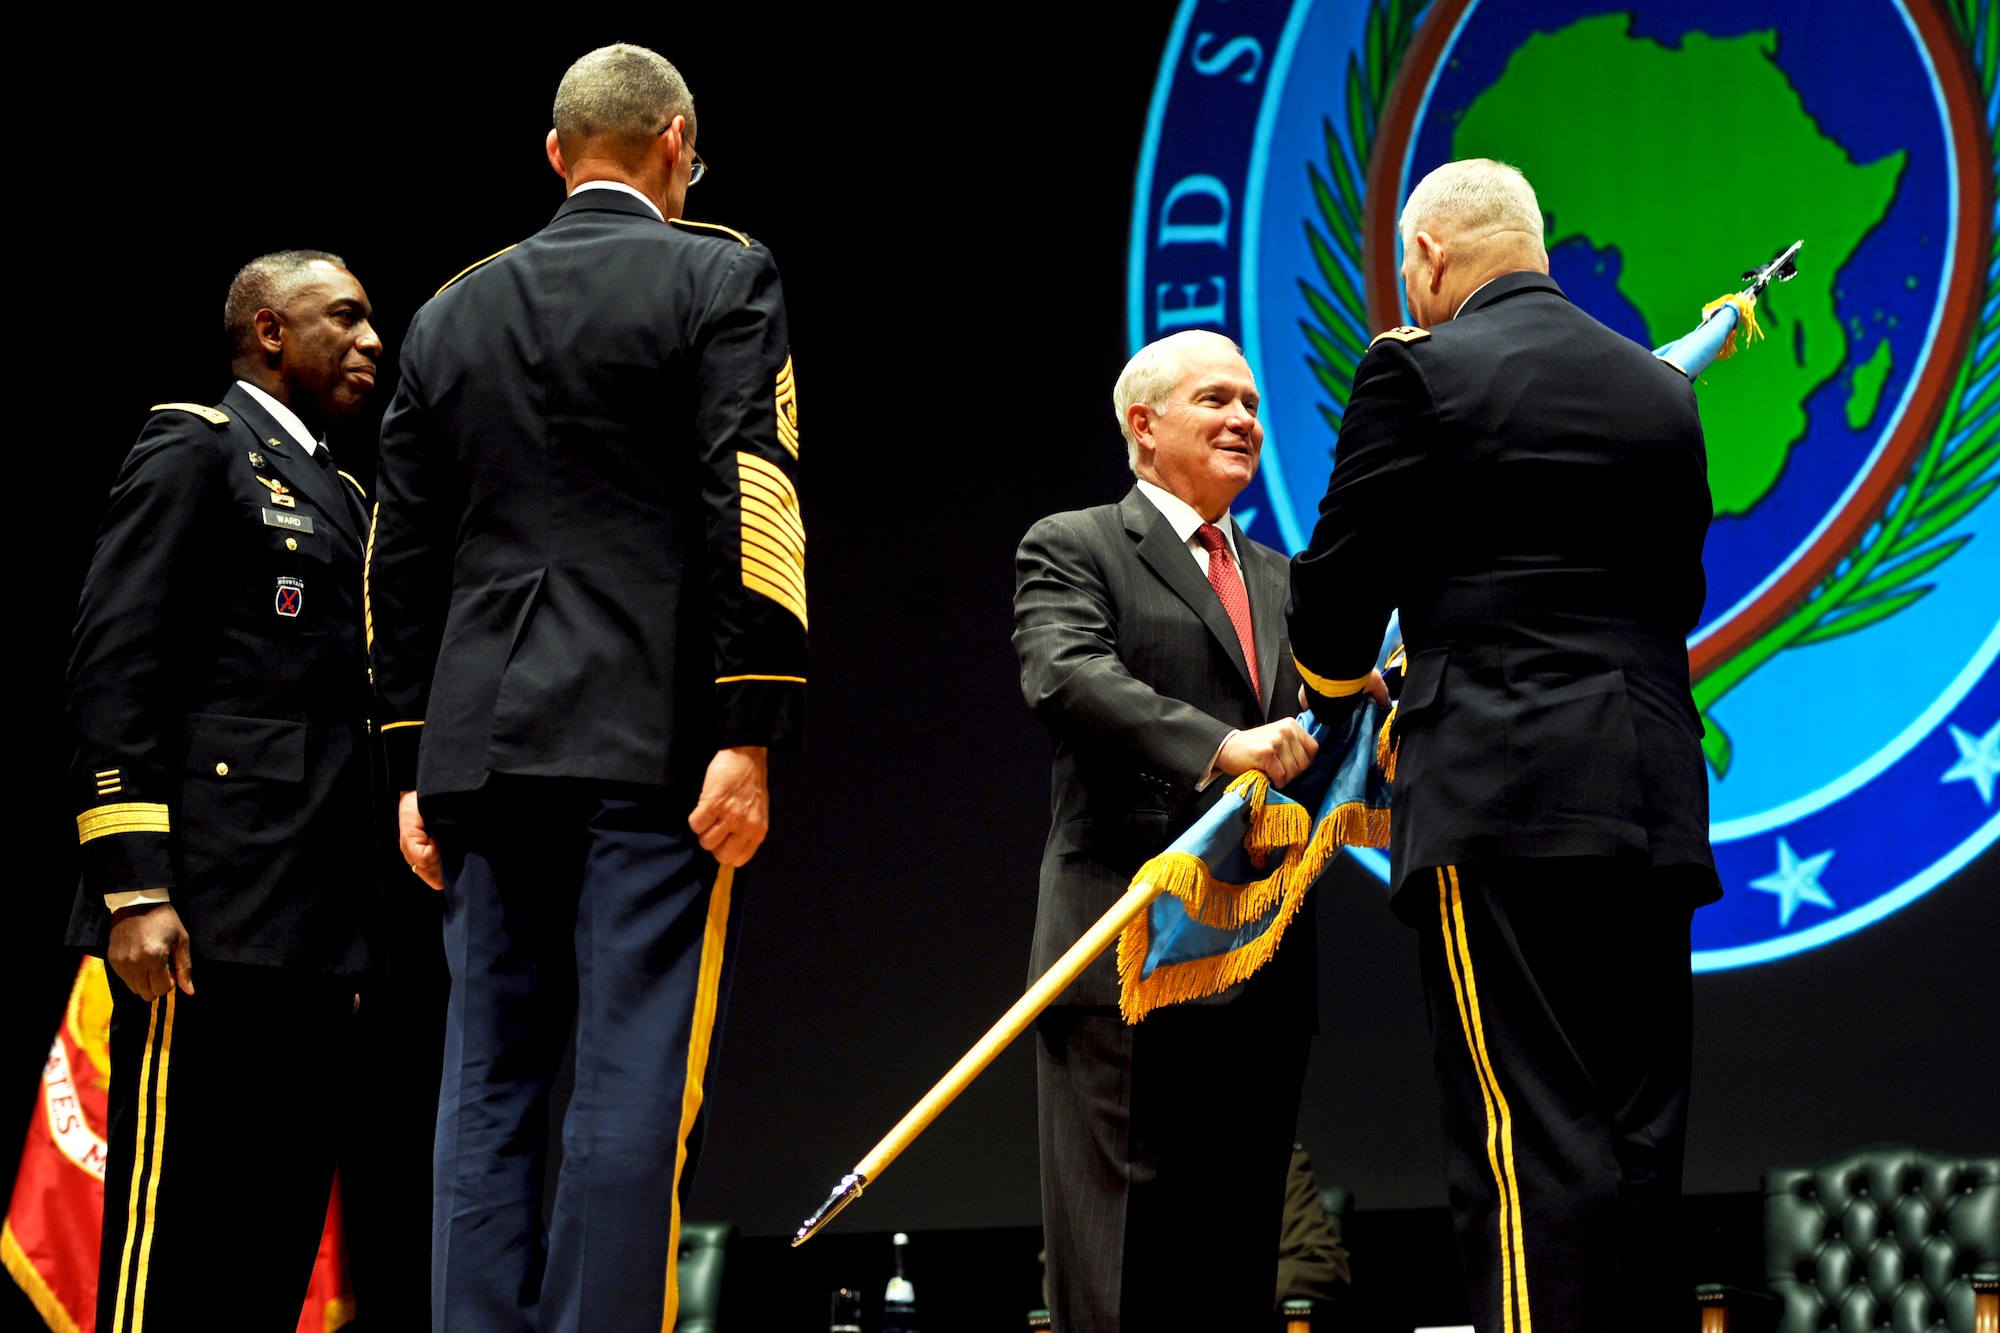 Defense Secretary Robert M. Gates passes the colors to Army Gen. Carter F. Ham, incoming commander of U.S. AFRICOM, while Army Gen. William E. “Kip” Ward (left), outgoing commander, looks on during the AFRICOM change of command ceremony at Sindelfingen Stadthalle City Hall in Stuttgart, Germany, March 9, 2011.  (Defense Department photo/Cherie Cullen)